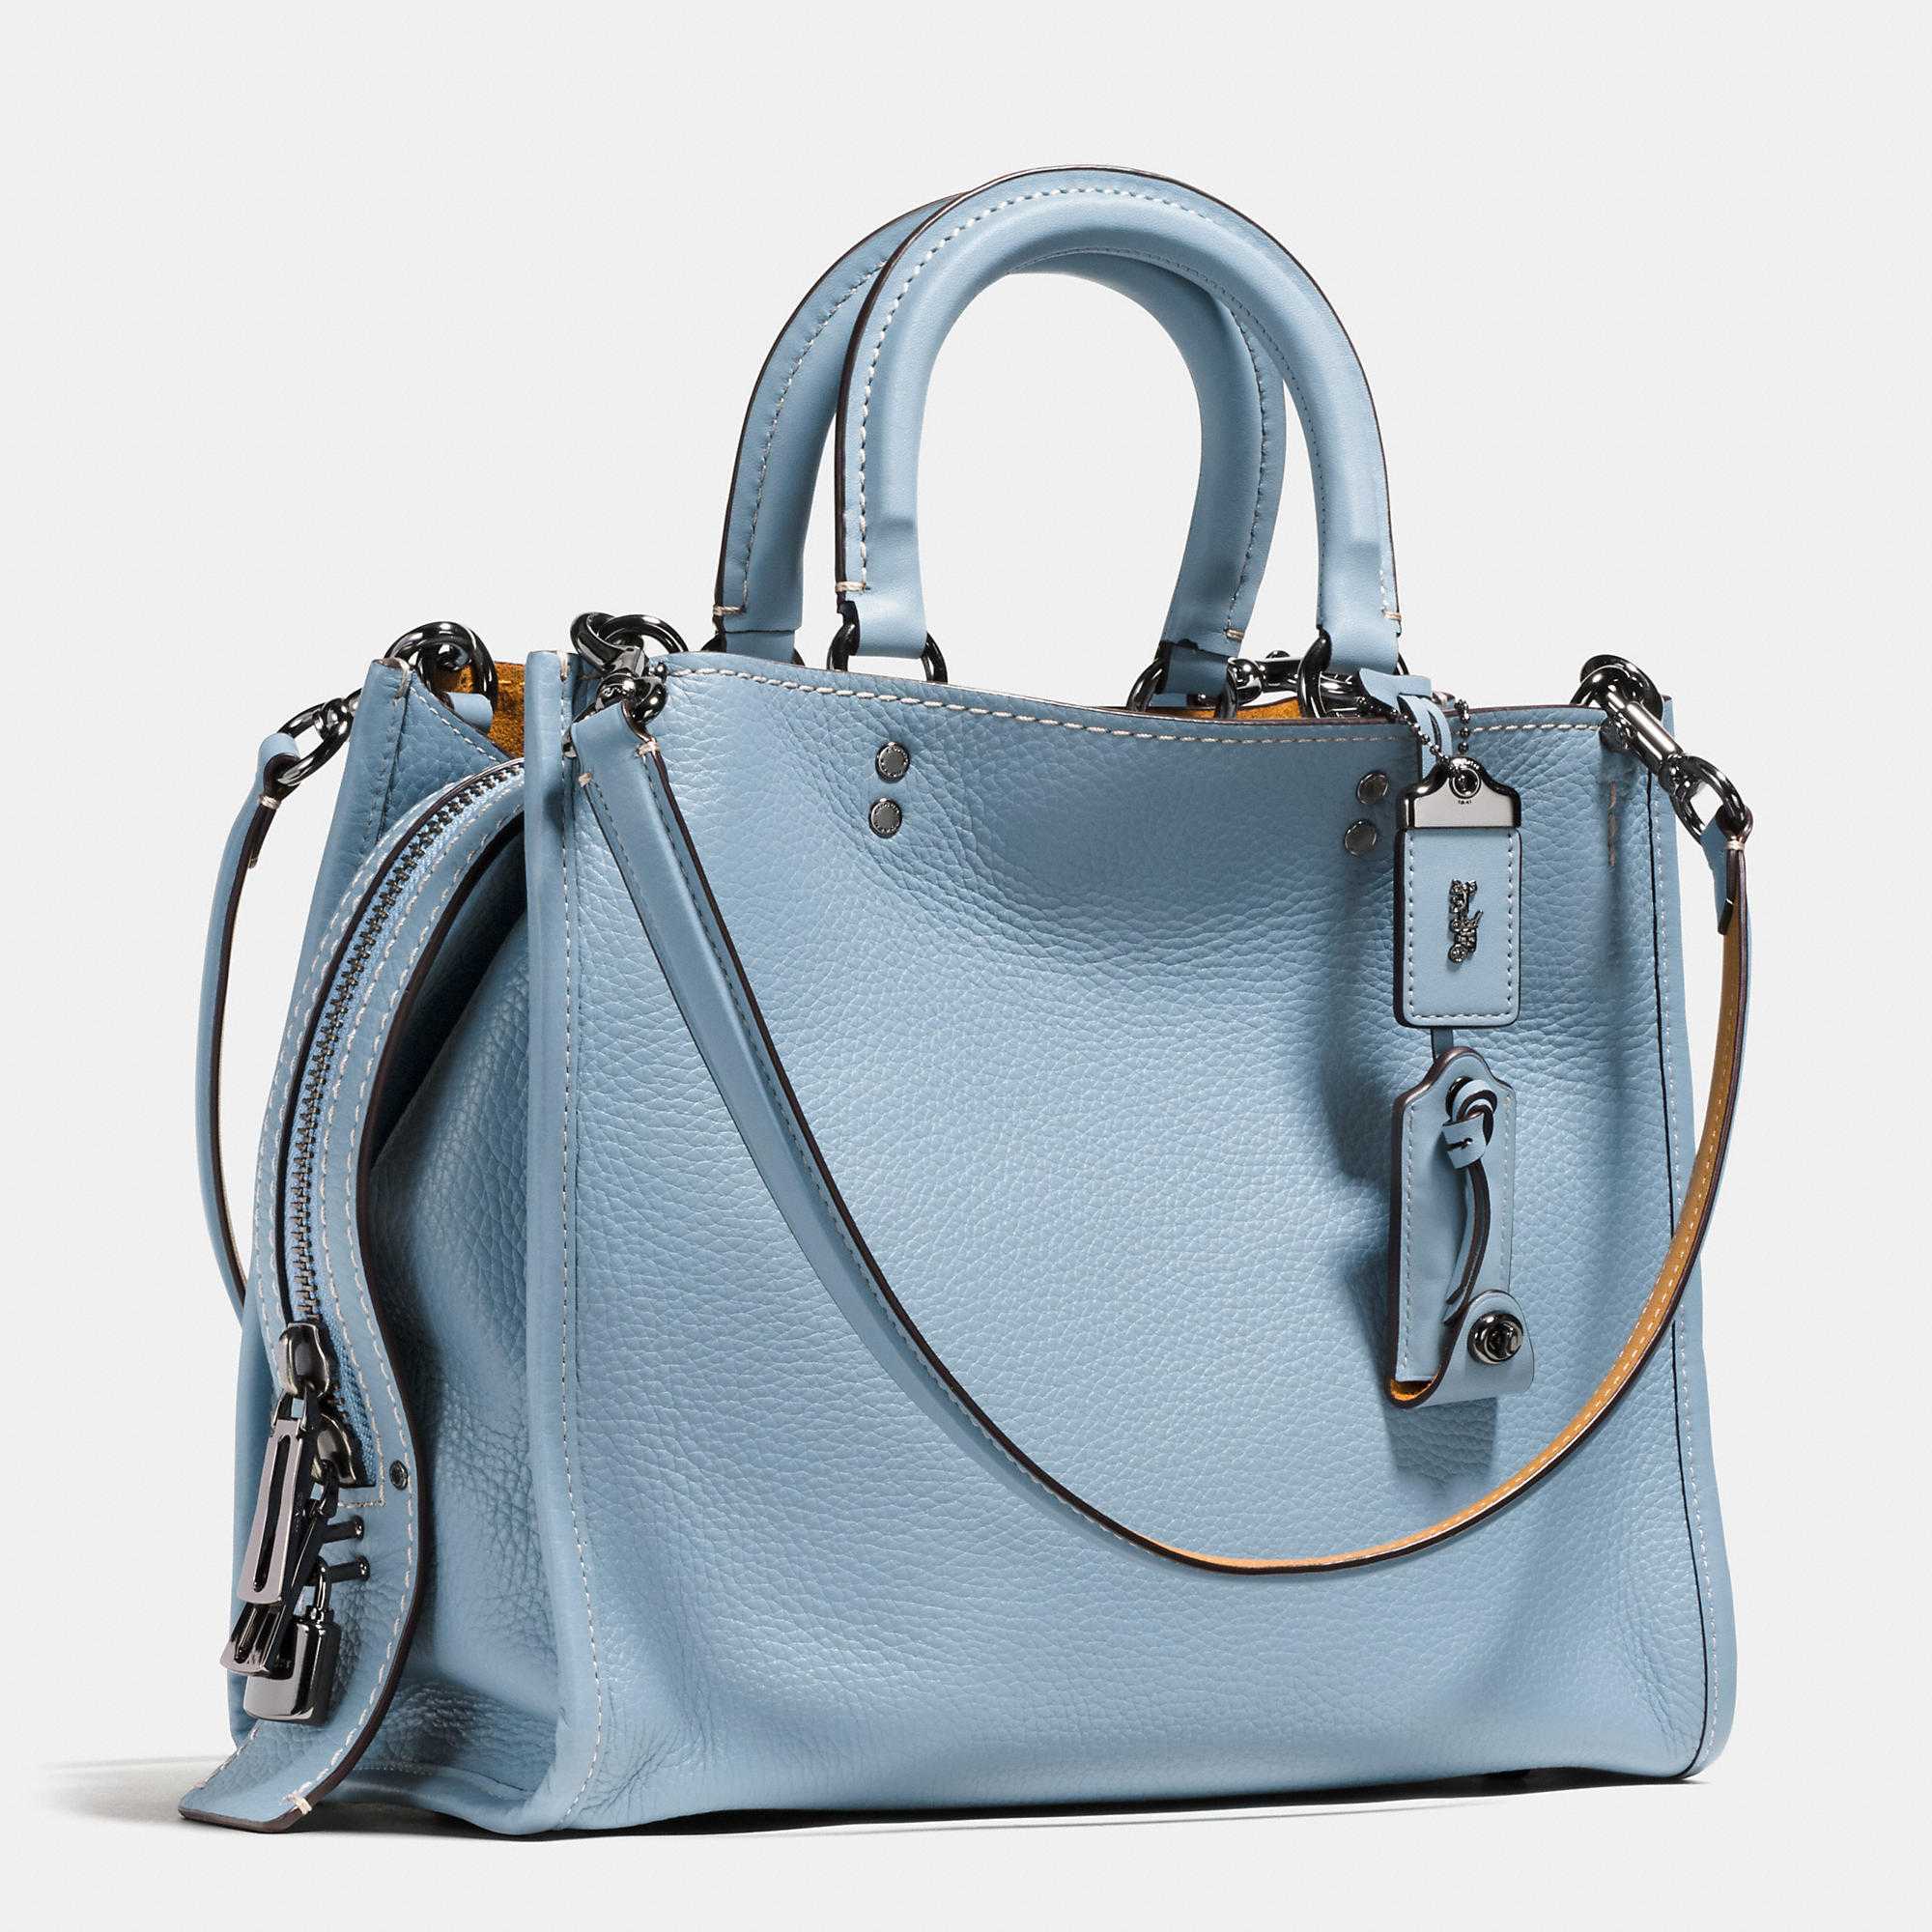 Rogue Bag In Glovetanned Pebble Leather - Click Image to Close